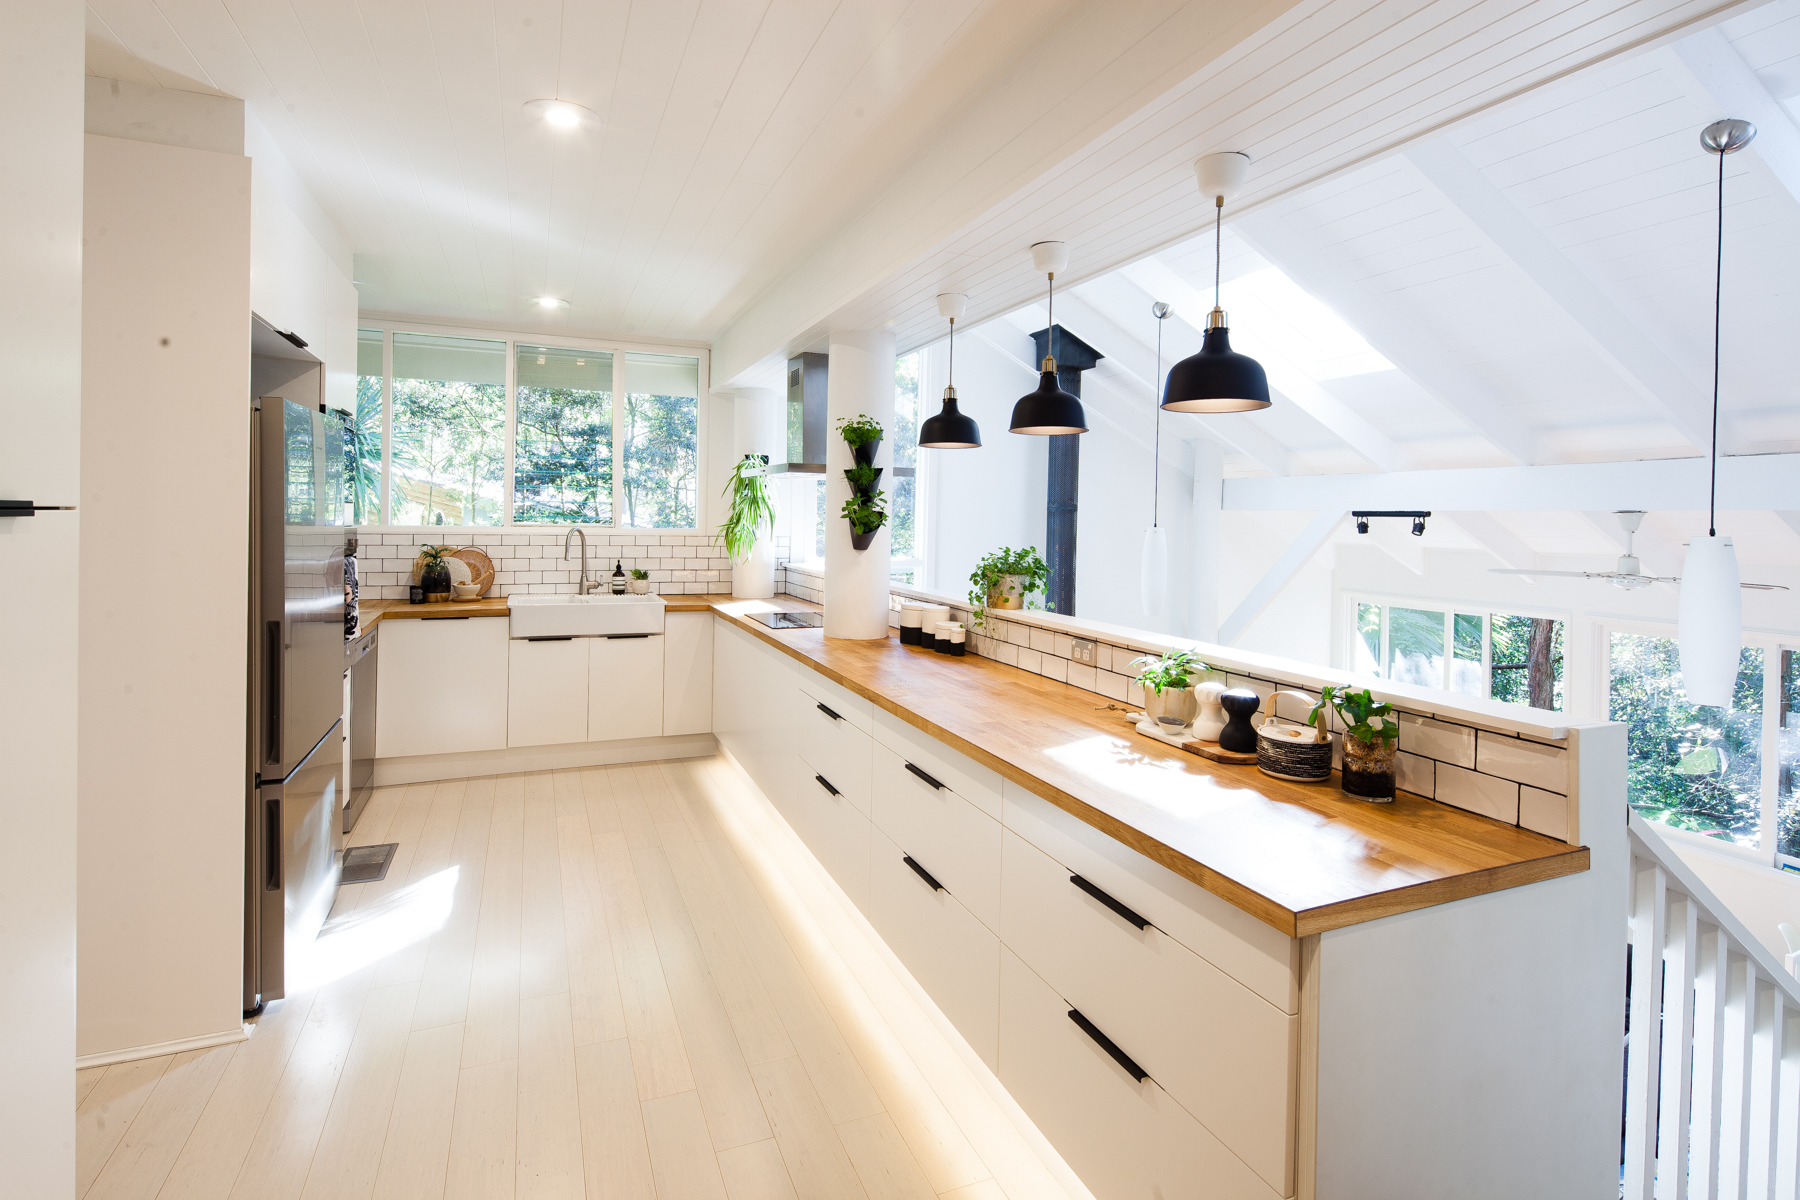 A Sydney Blogger S Light Filled And Lovely Ikea Kitchen The